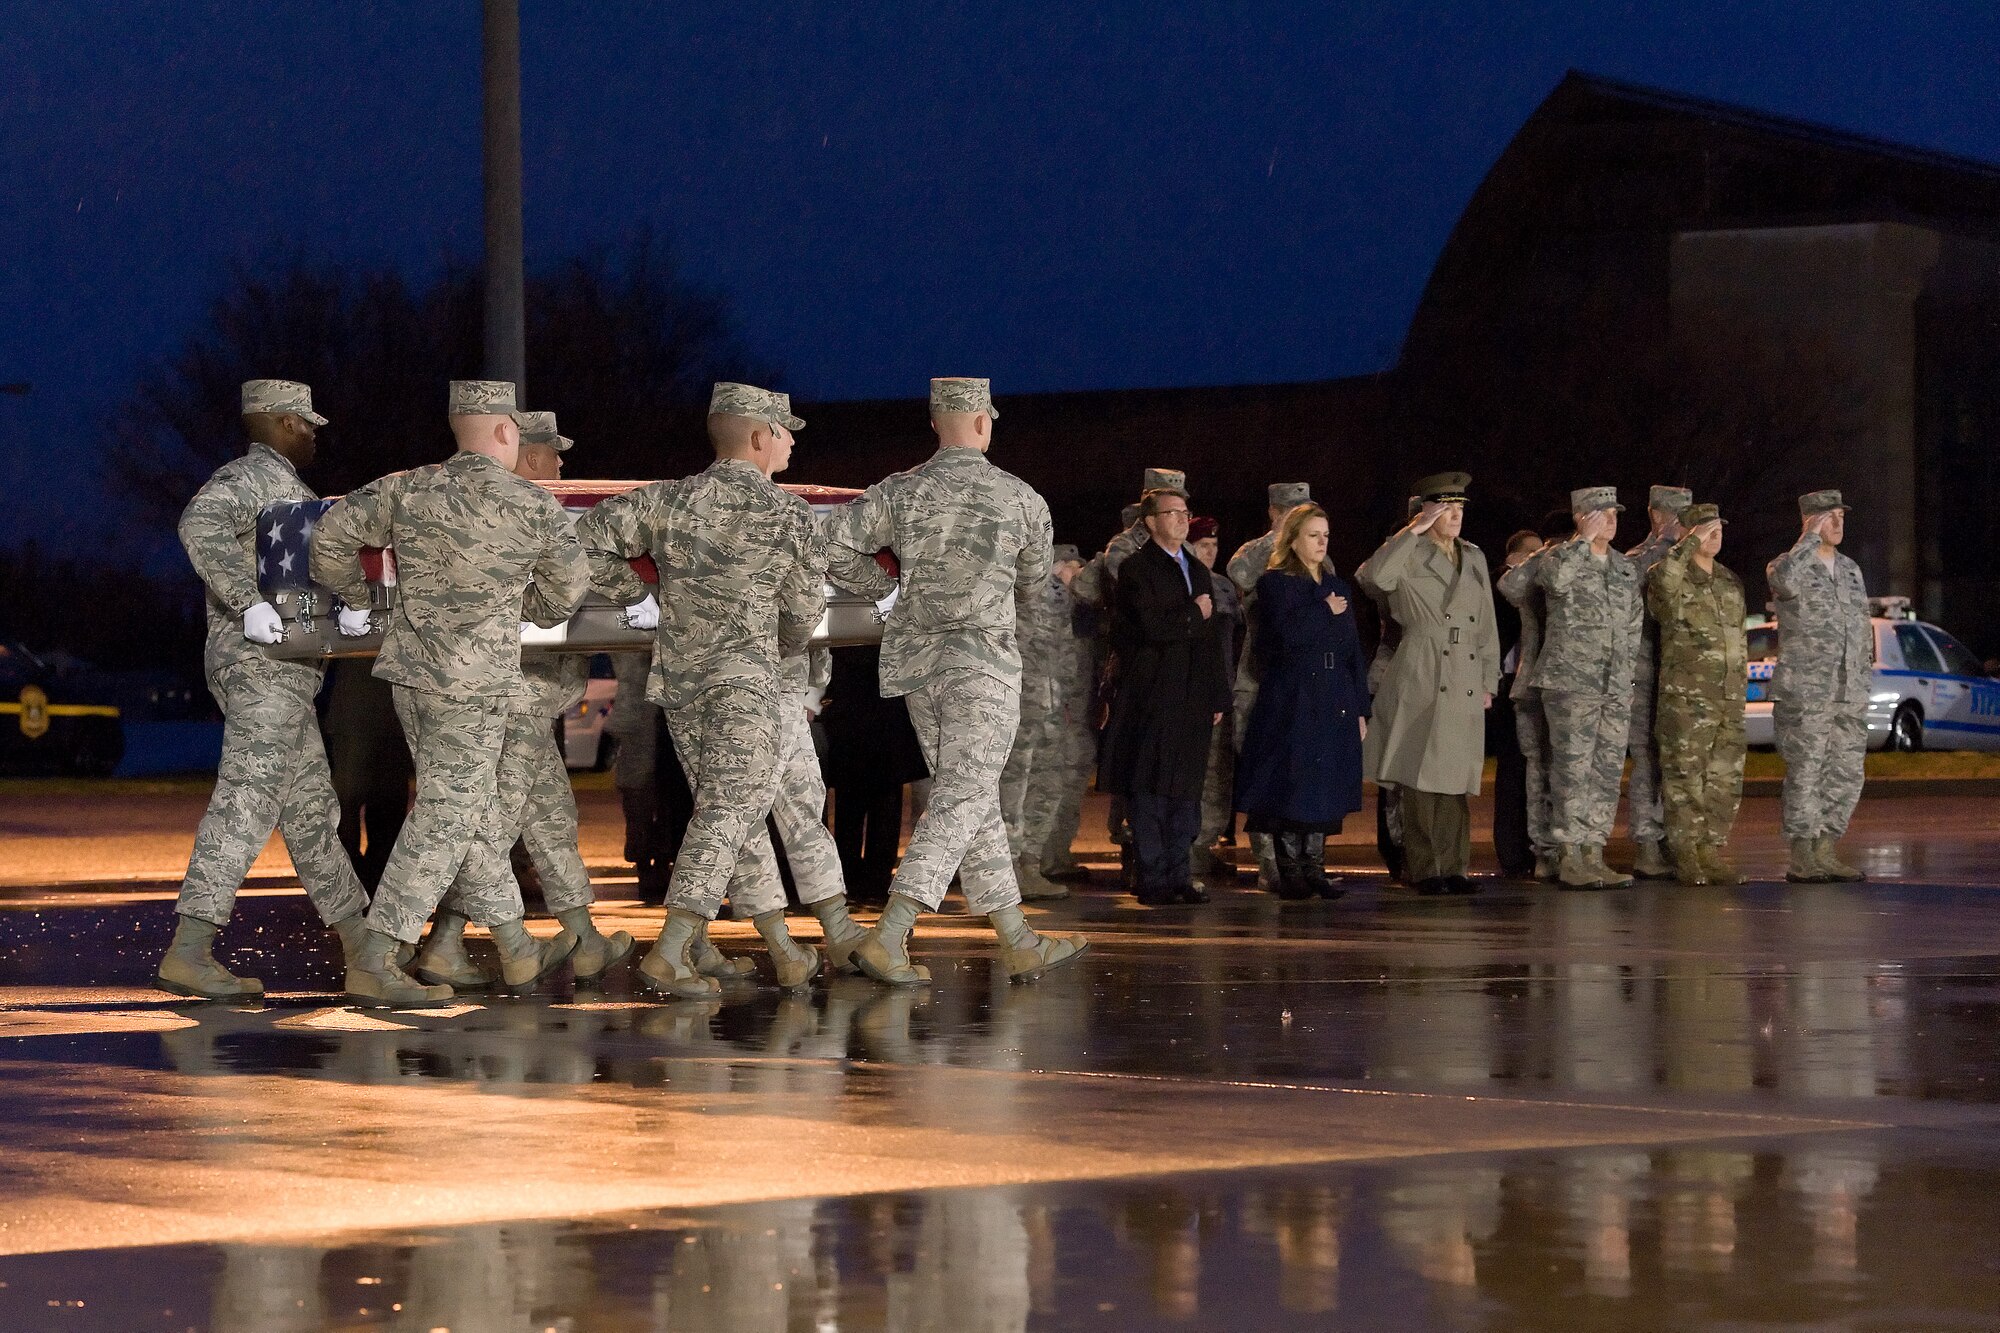 A U.S. Air Force carry team transfers the remains of Staff Sgt. Chester J. McBride, of Statesboro, Ga., during a dignified transfer Dec. 23, 2015, at New Castle Air National Guard Base, New Castle, Del. McBride was assigned to the Air Force Office of Special Investigations, Detachment 405, Maxwell Air Force Base, Ala. (U.S. Air Force photo/Roland Balik)